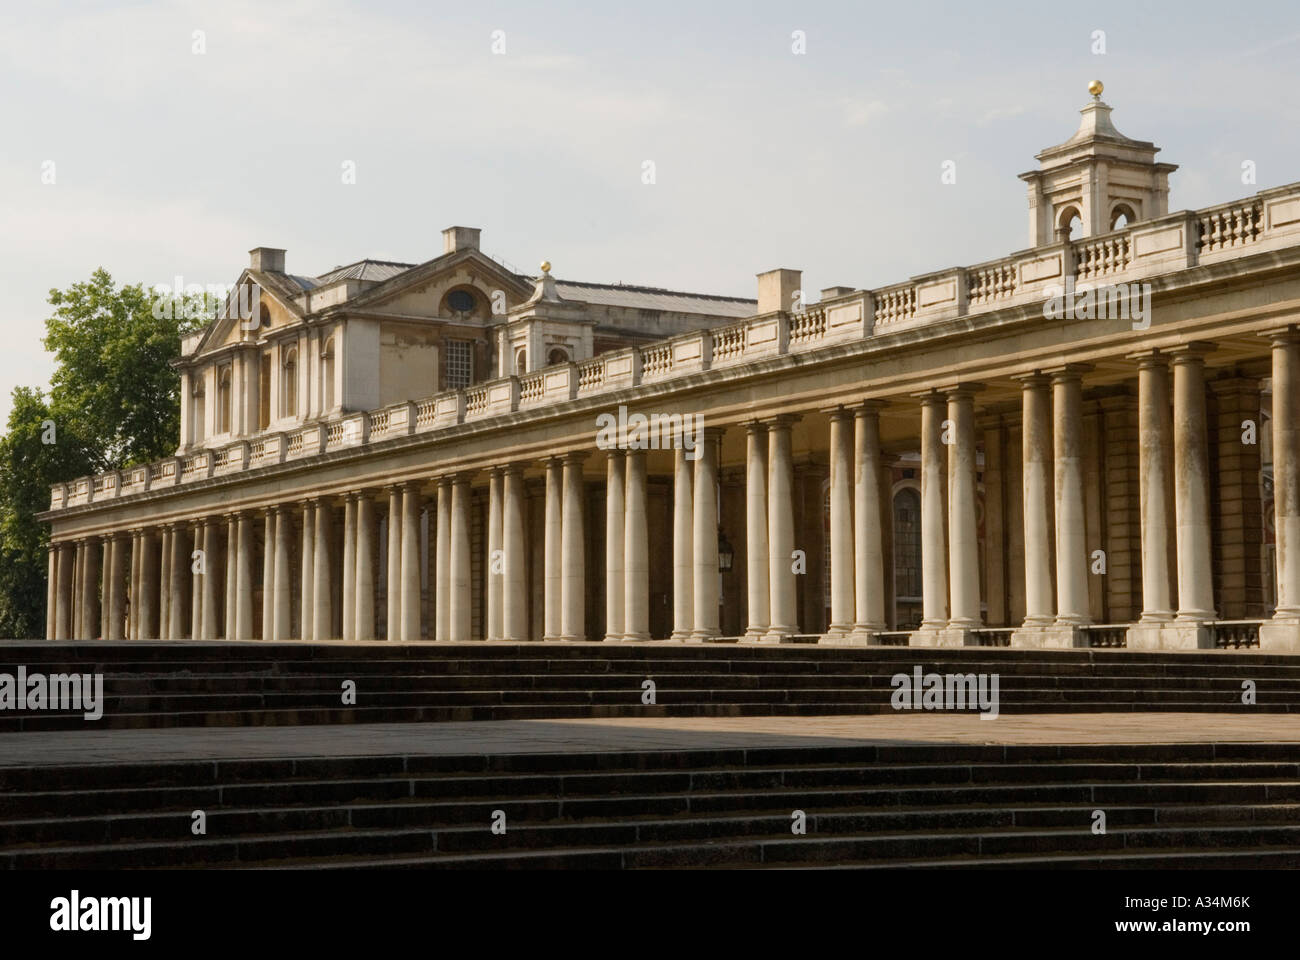 Die Old Royal Naval College Greenwich SE London England University of Greenwich und Trinity College of Music. Stockfoto